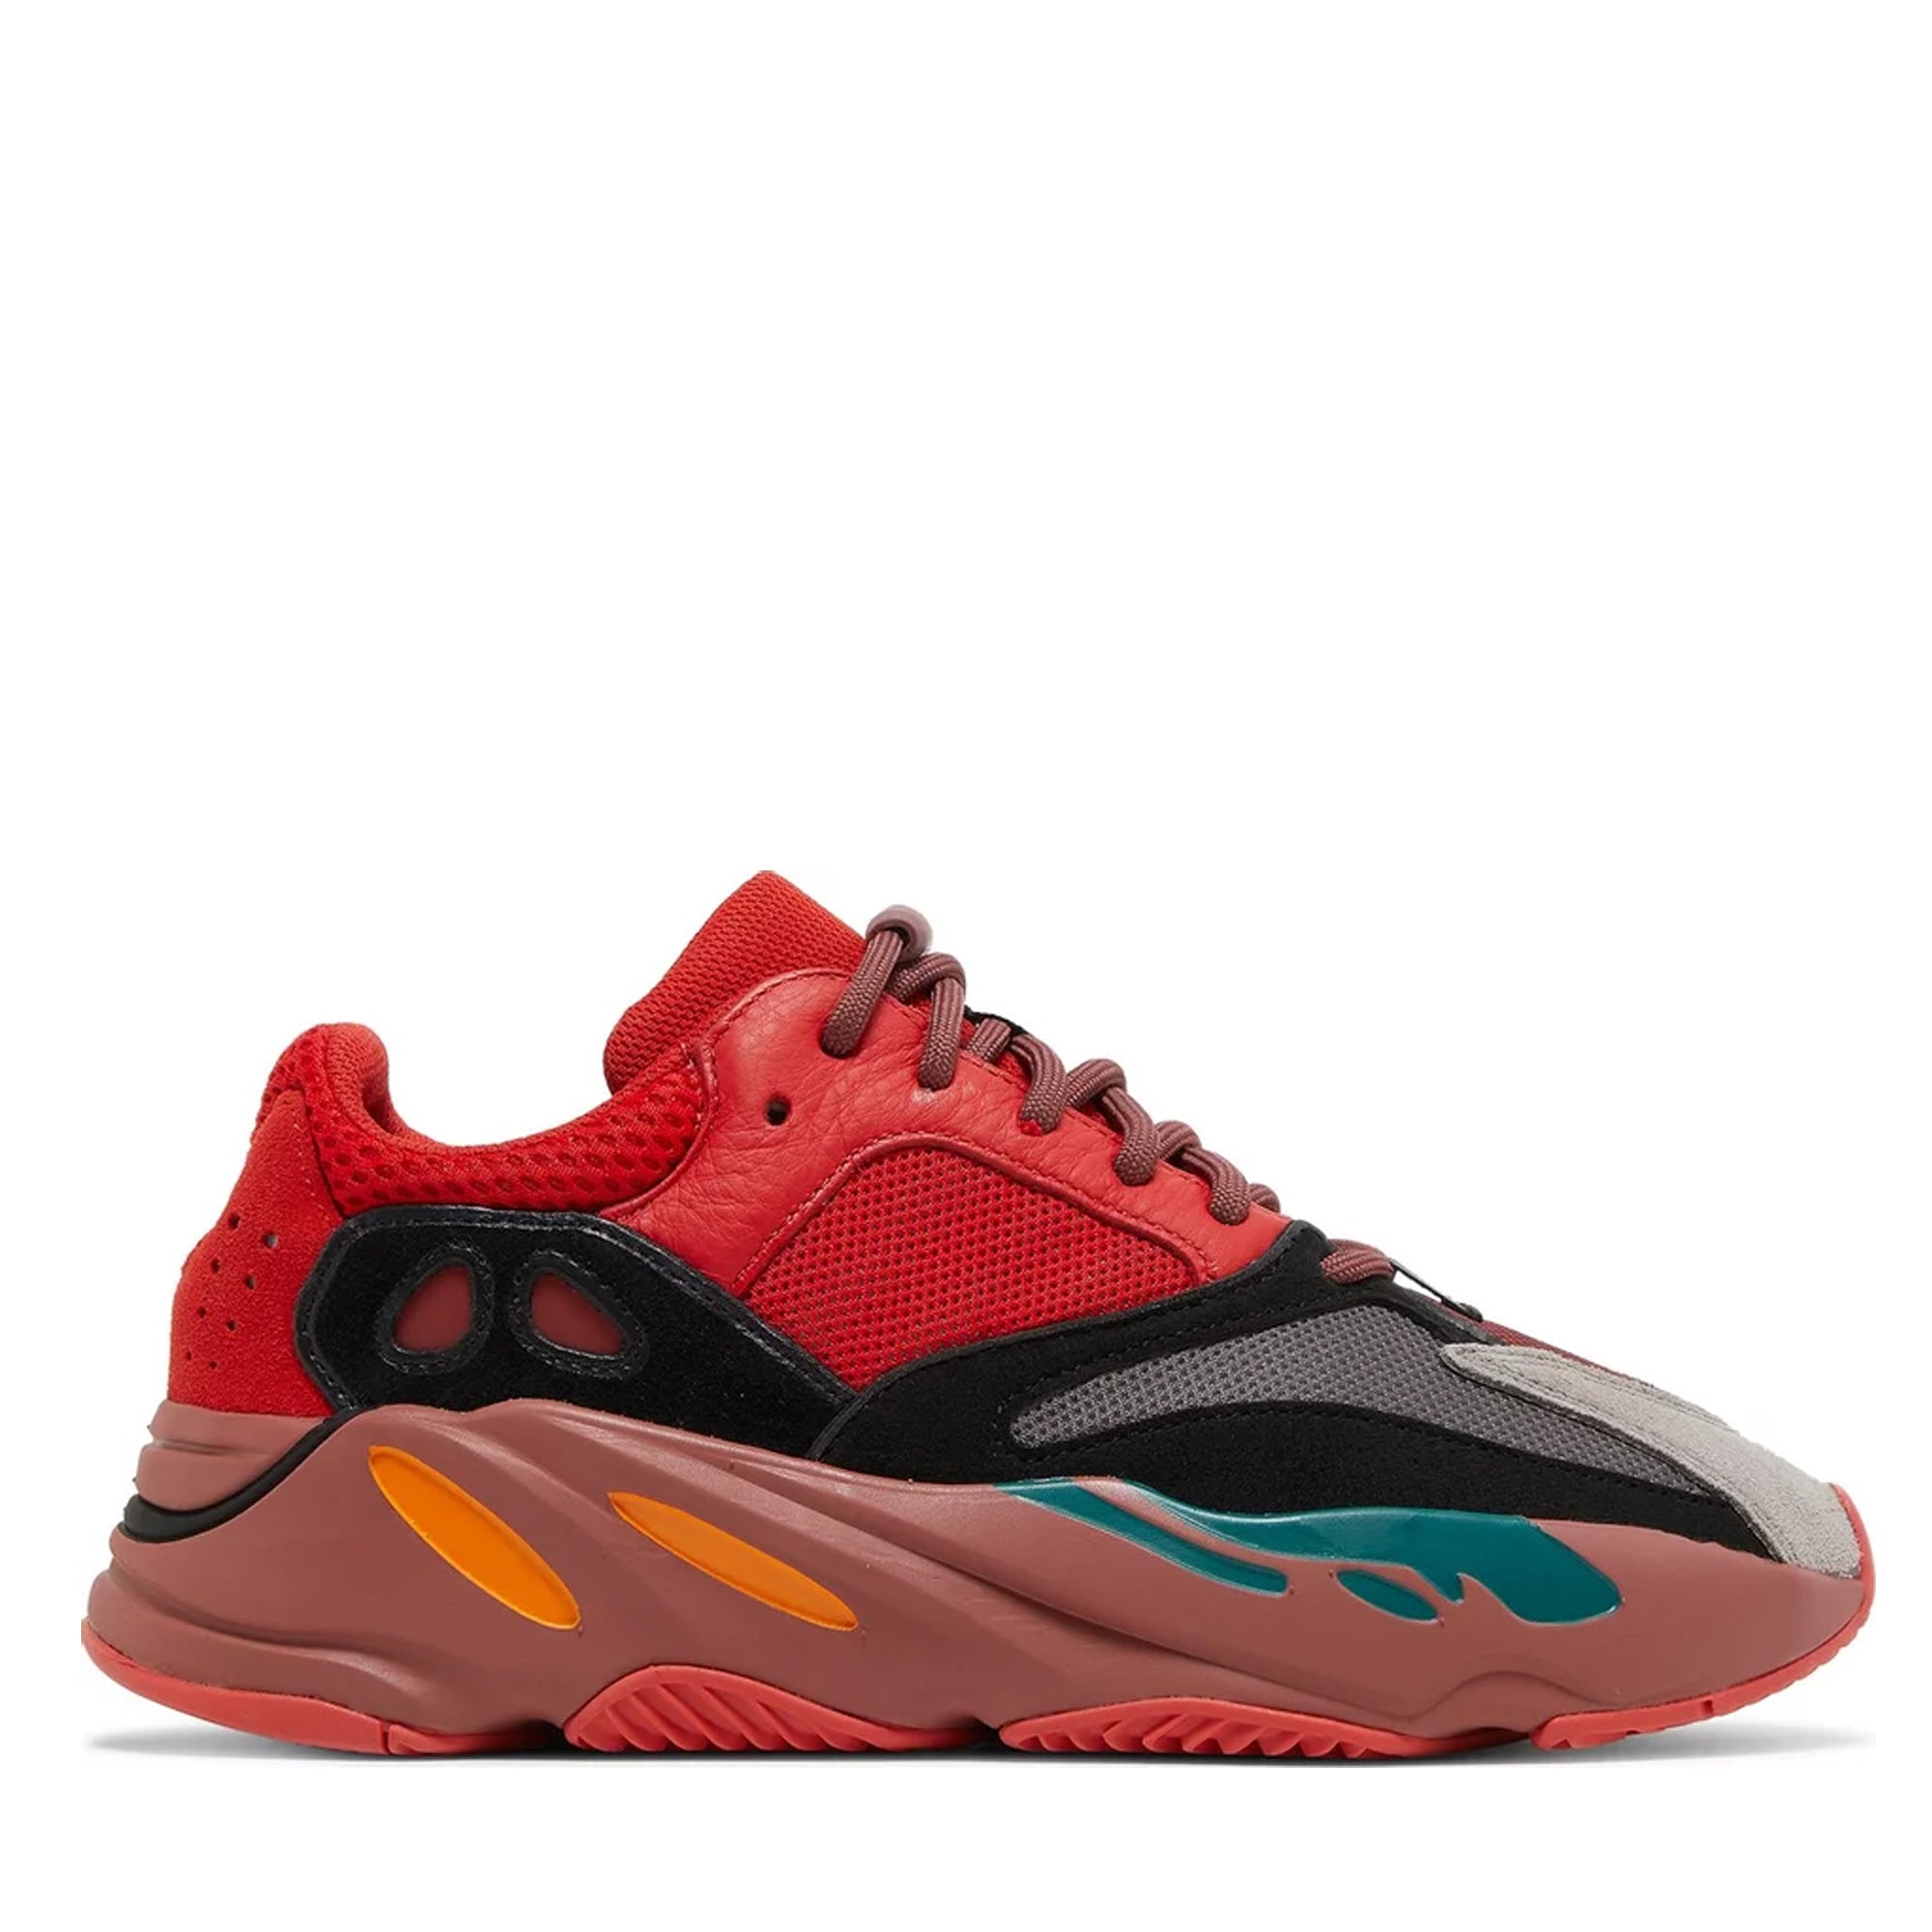 adidas Yeezy Boost 700 Hi-Res Red-PLUS